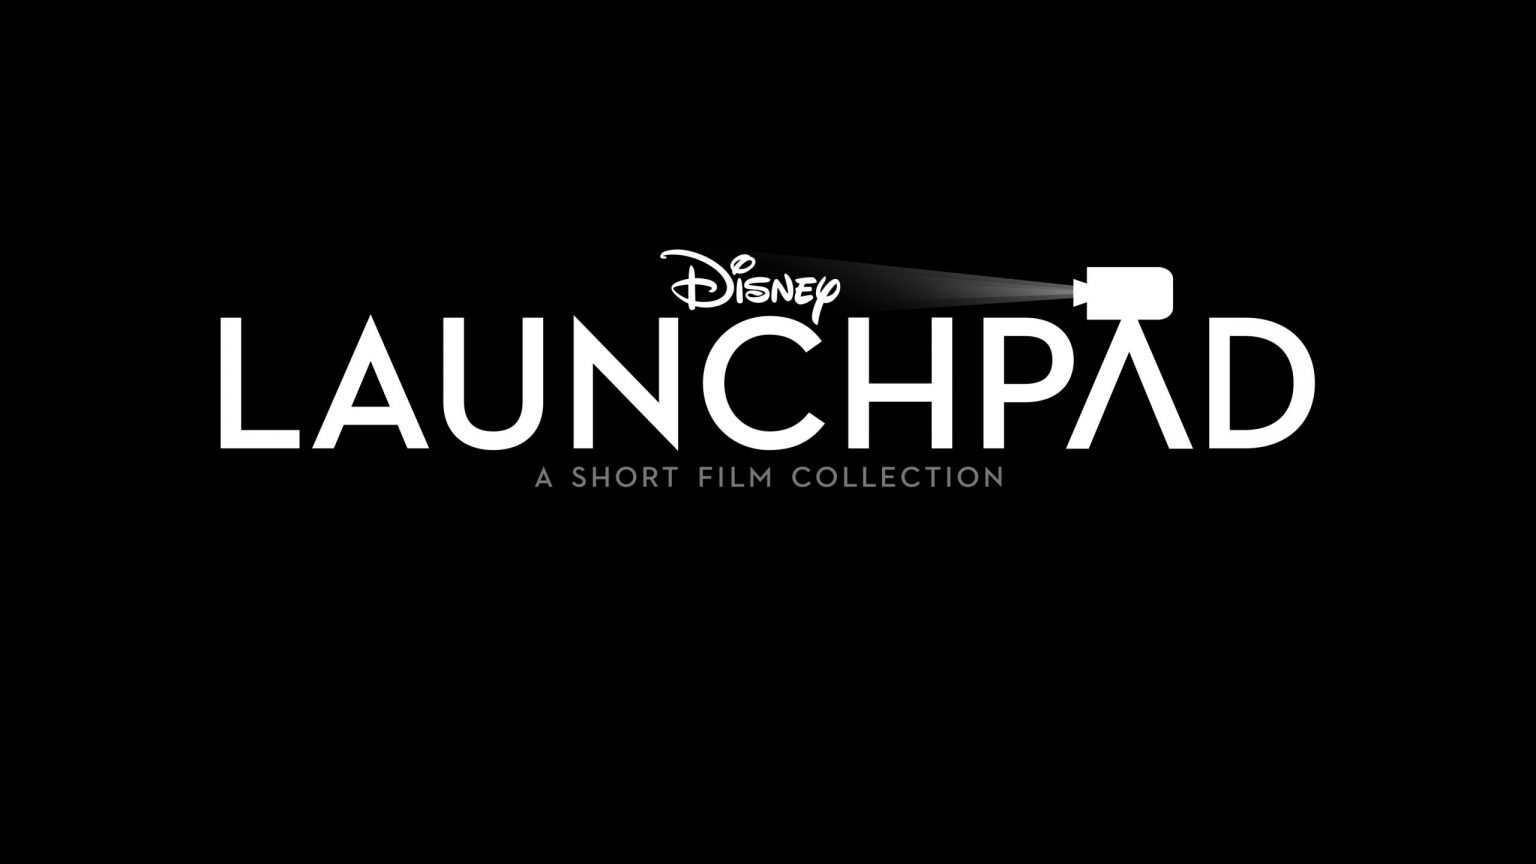 The official logo for the Disney Launchpad short film series exclusive to Disney+.